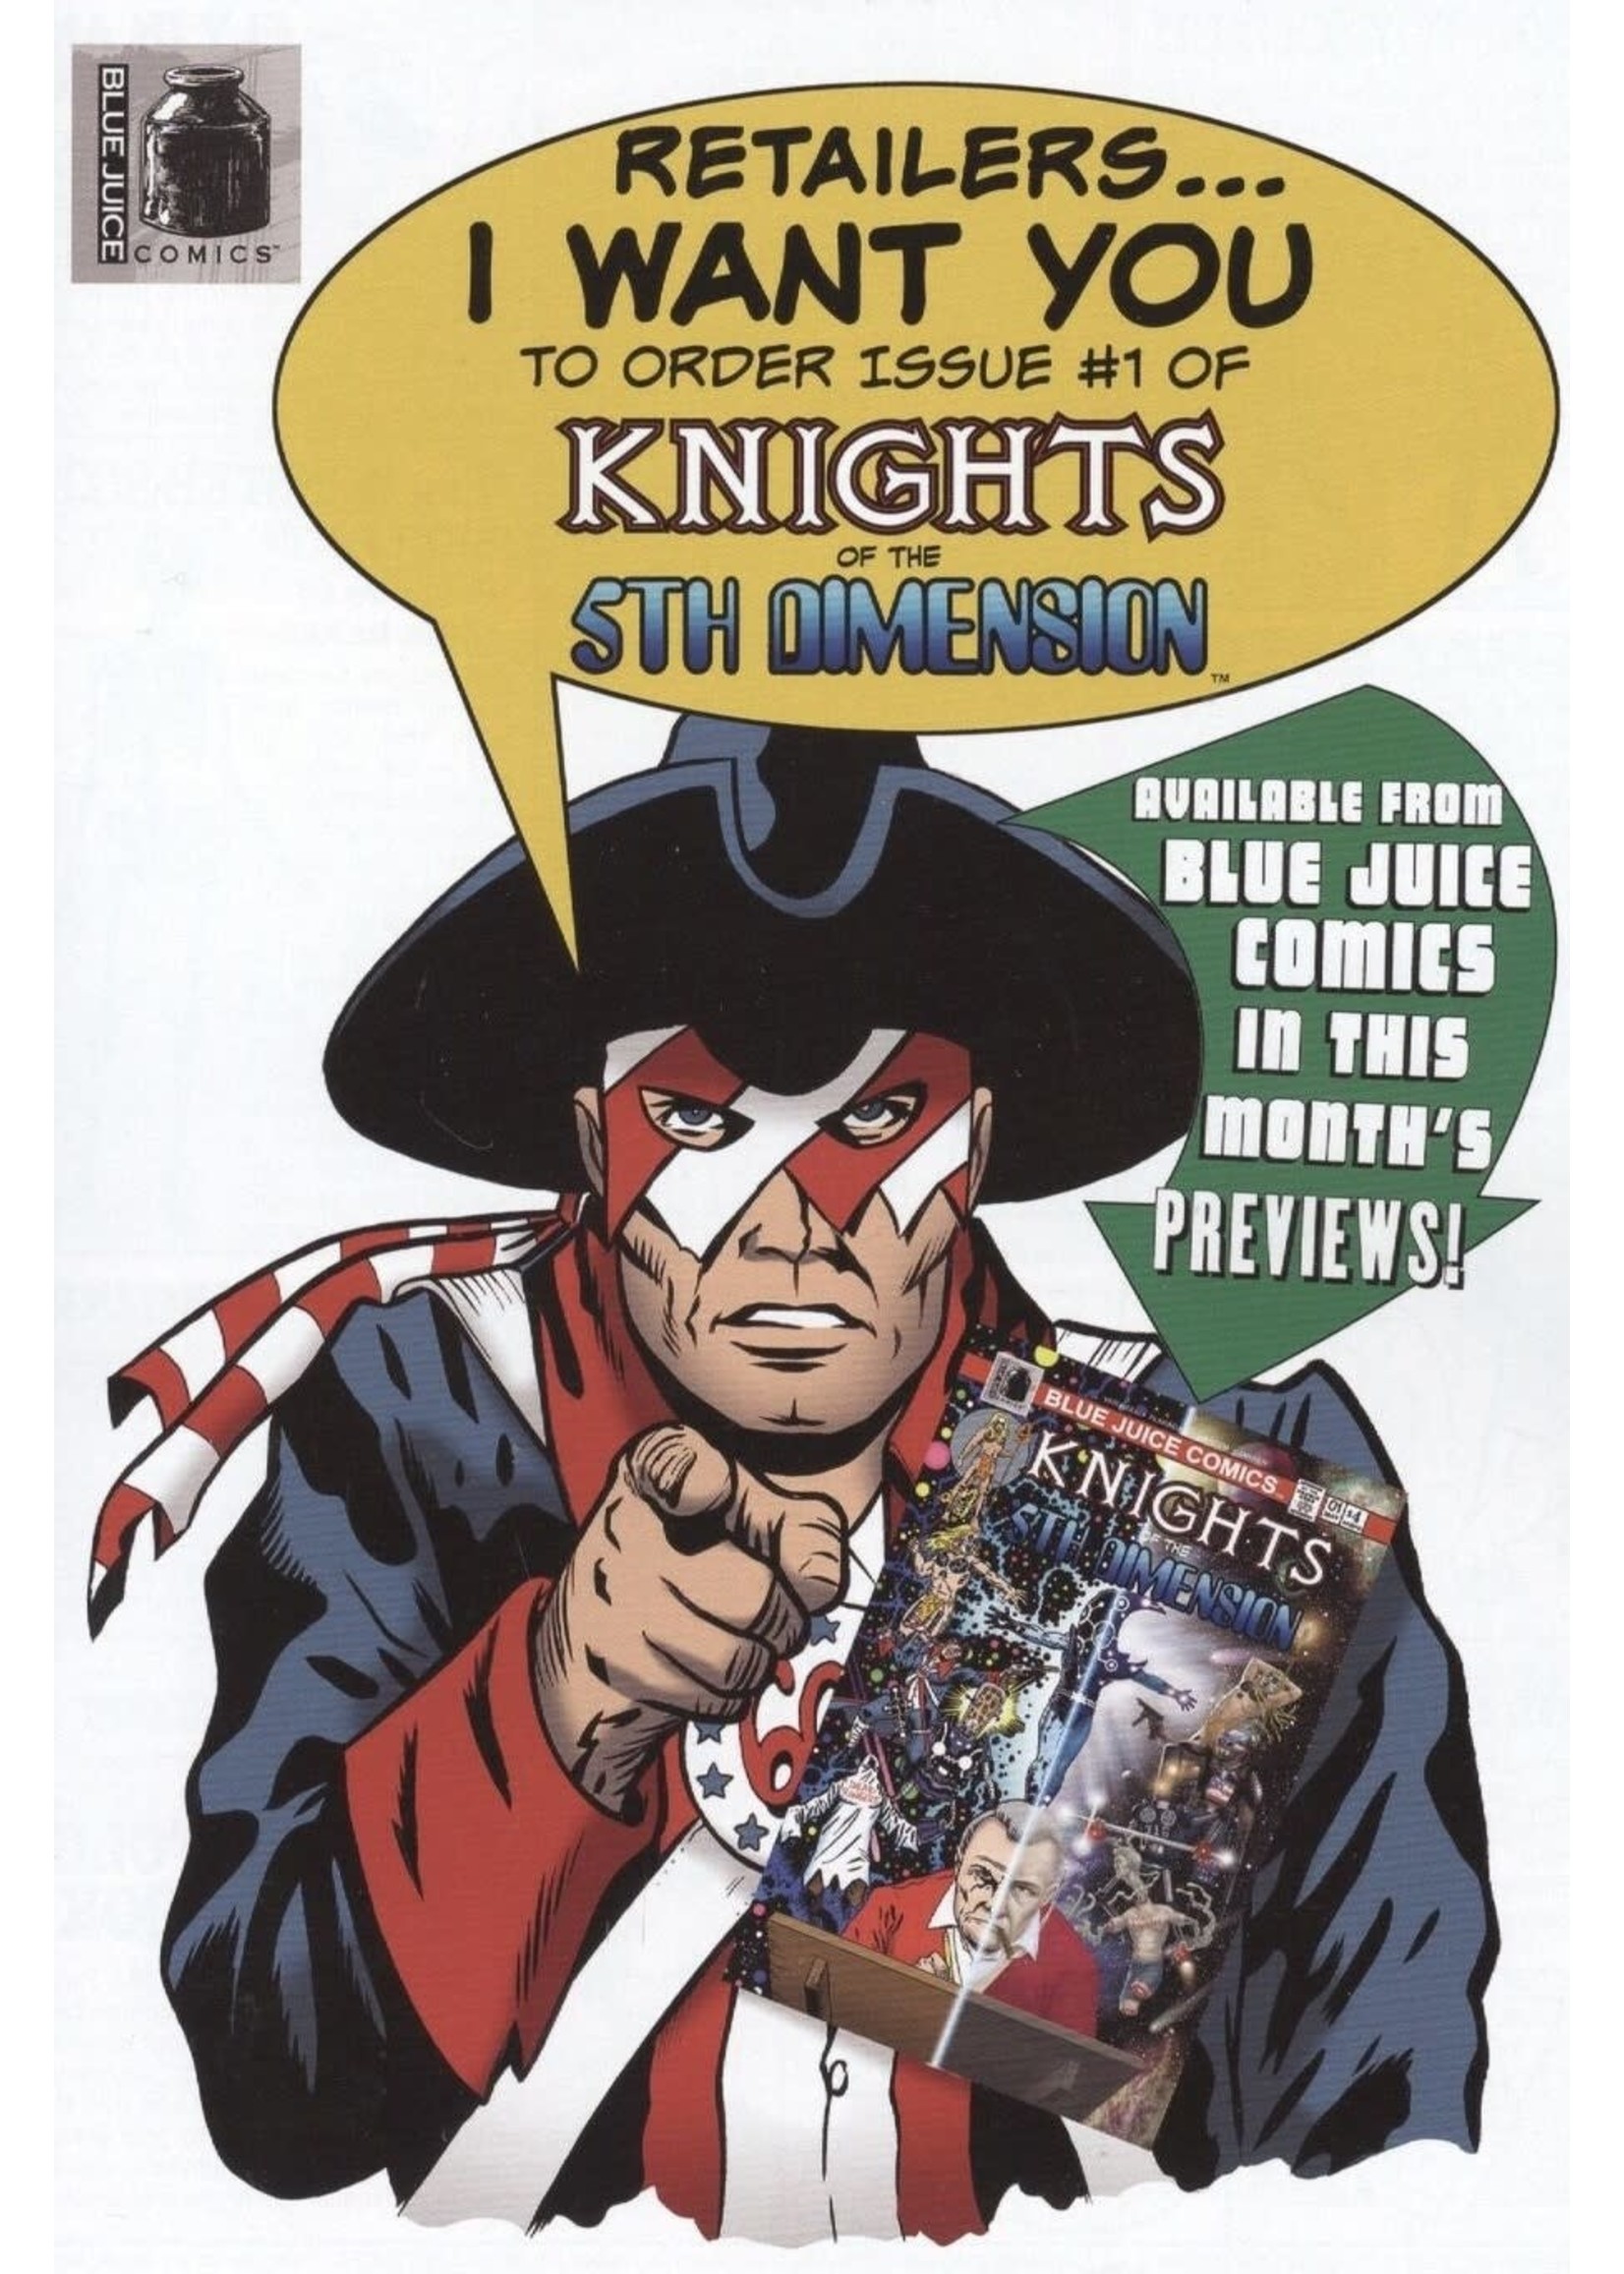 KNIGHTS OF THE FIFTH DIMENSION #1 (OF 4) SAMPLER